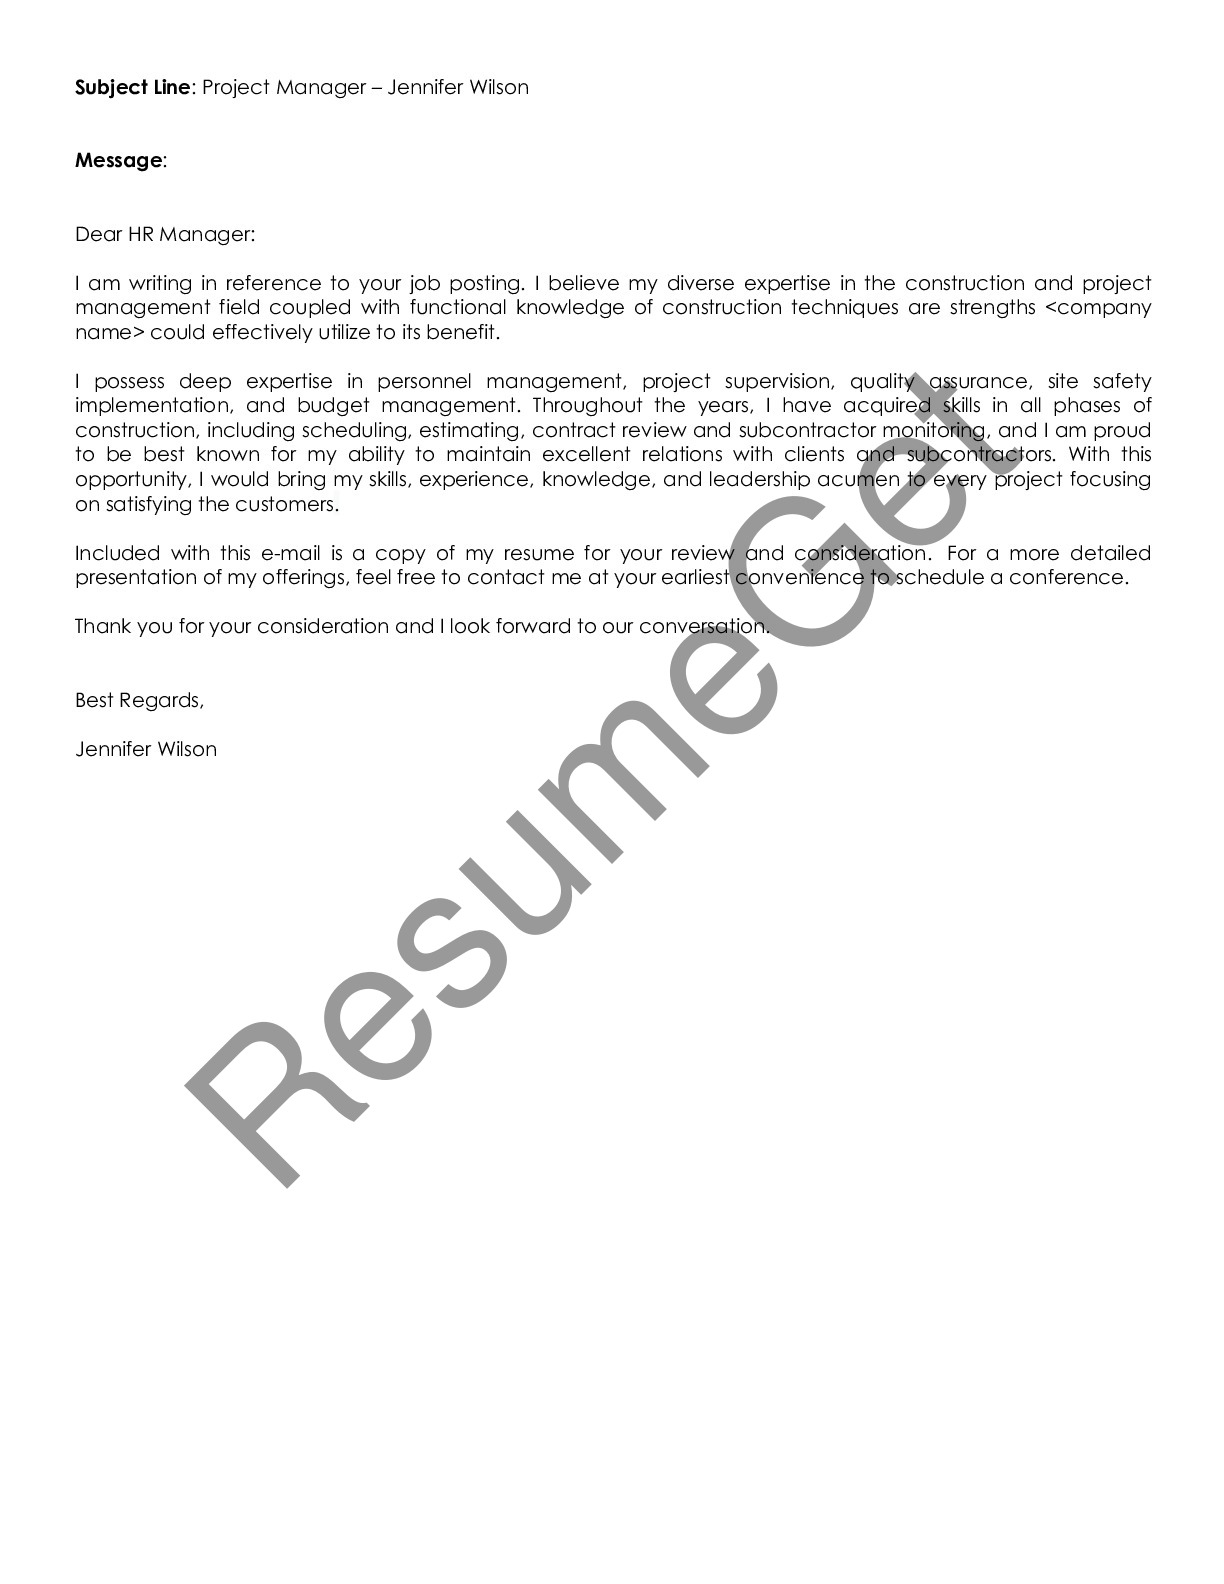 Project Manager Resume Examples 2019 - ResumeGet.com